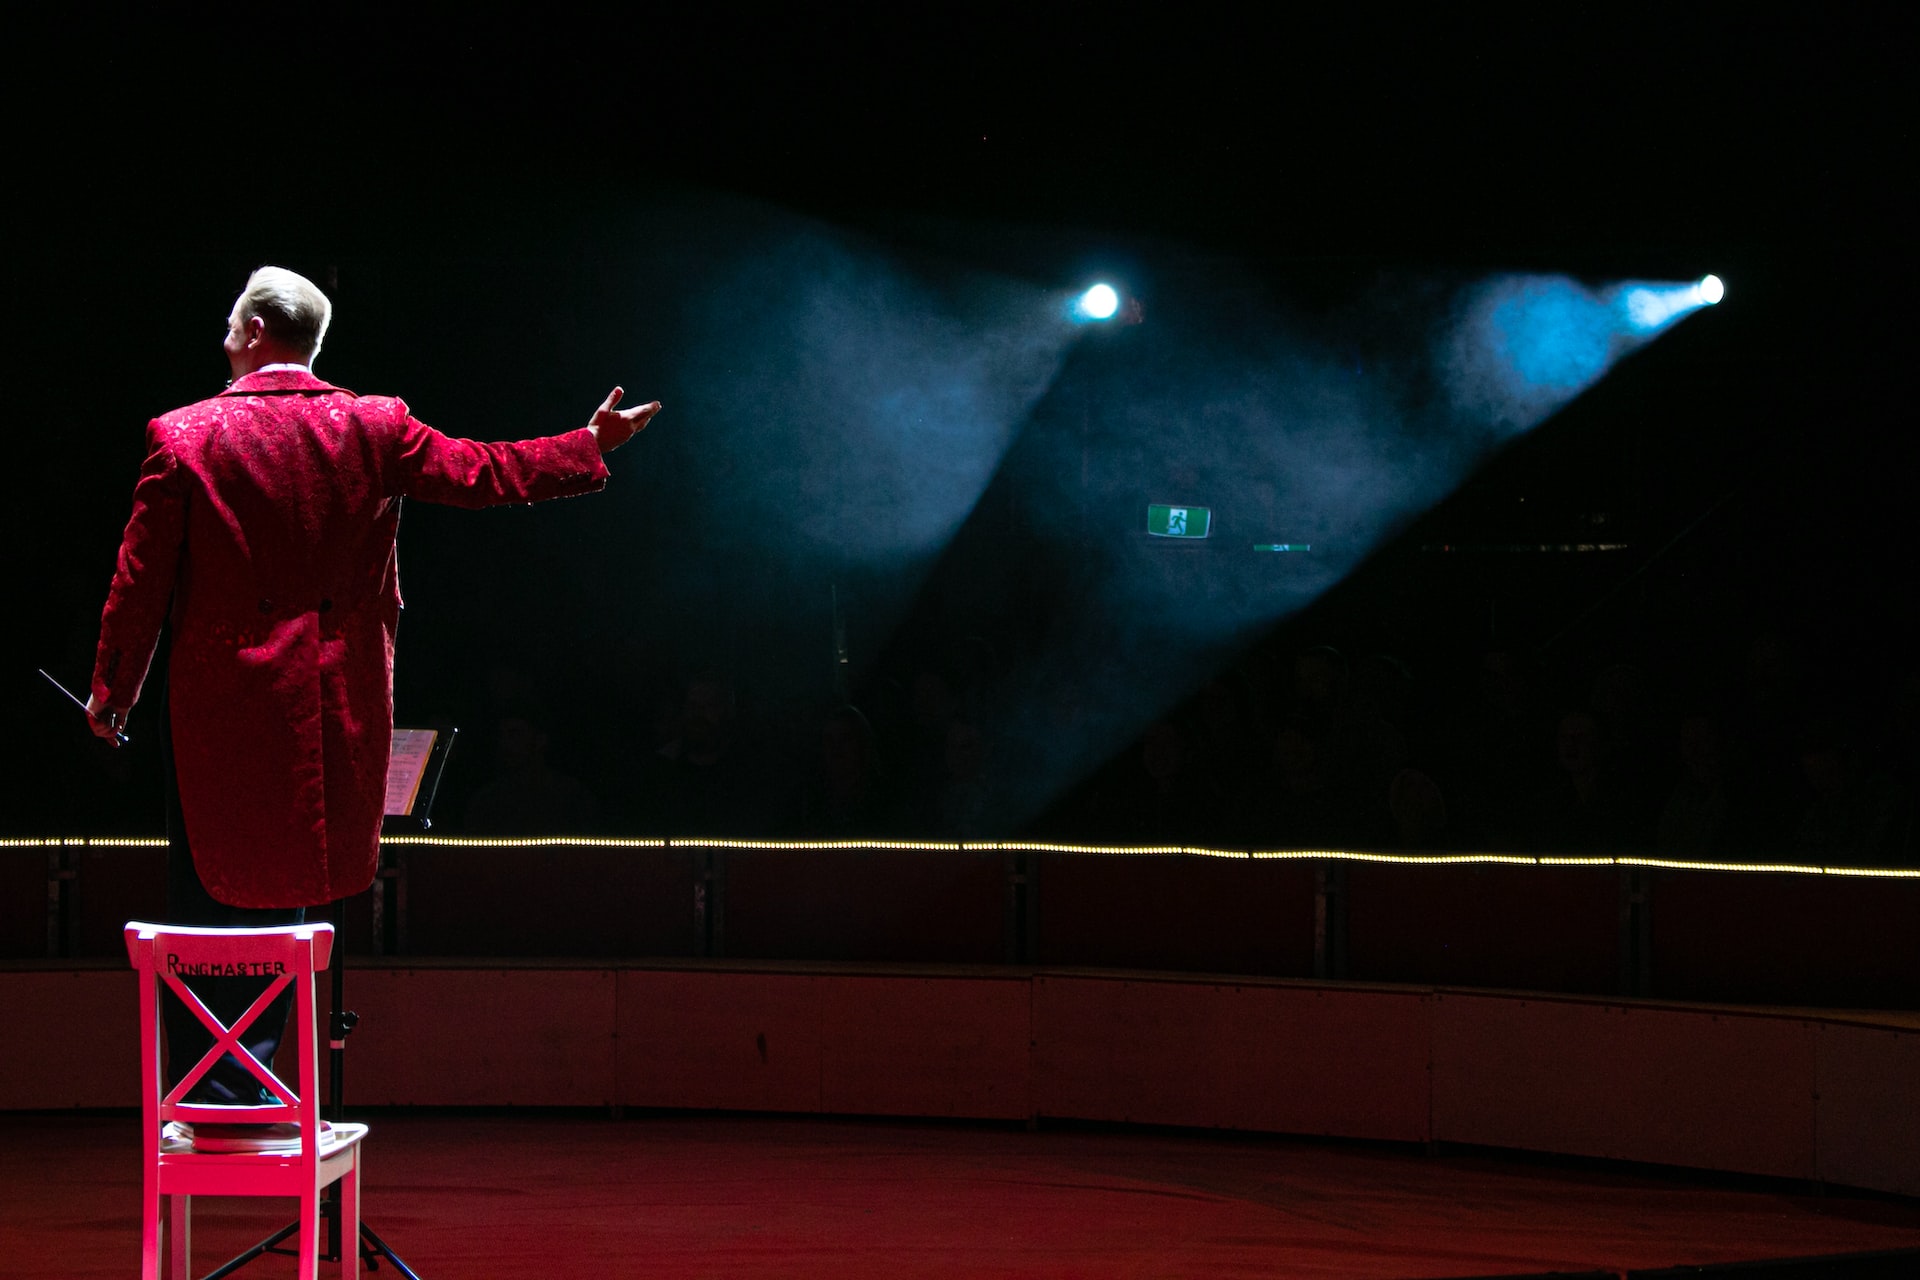 a ringmaster in a red suit standing on a chair in front of spotlights